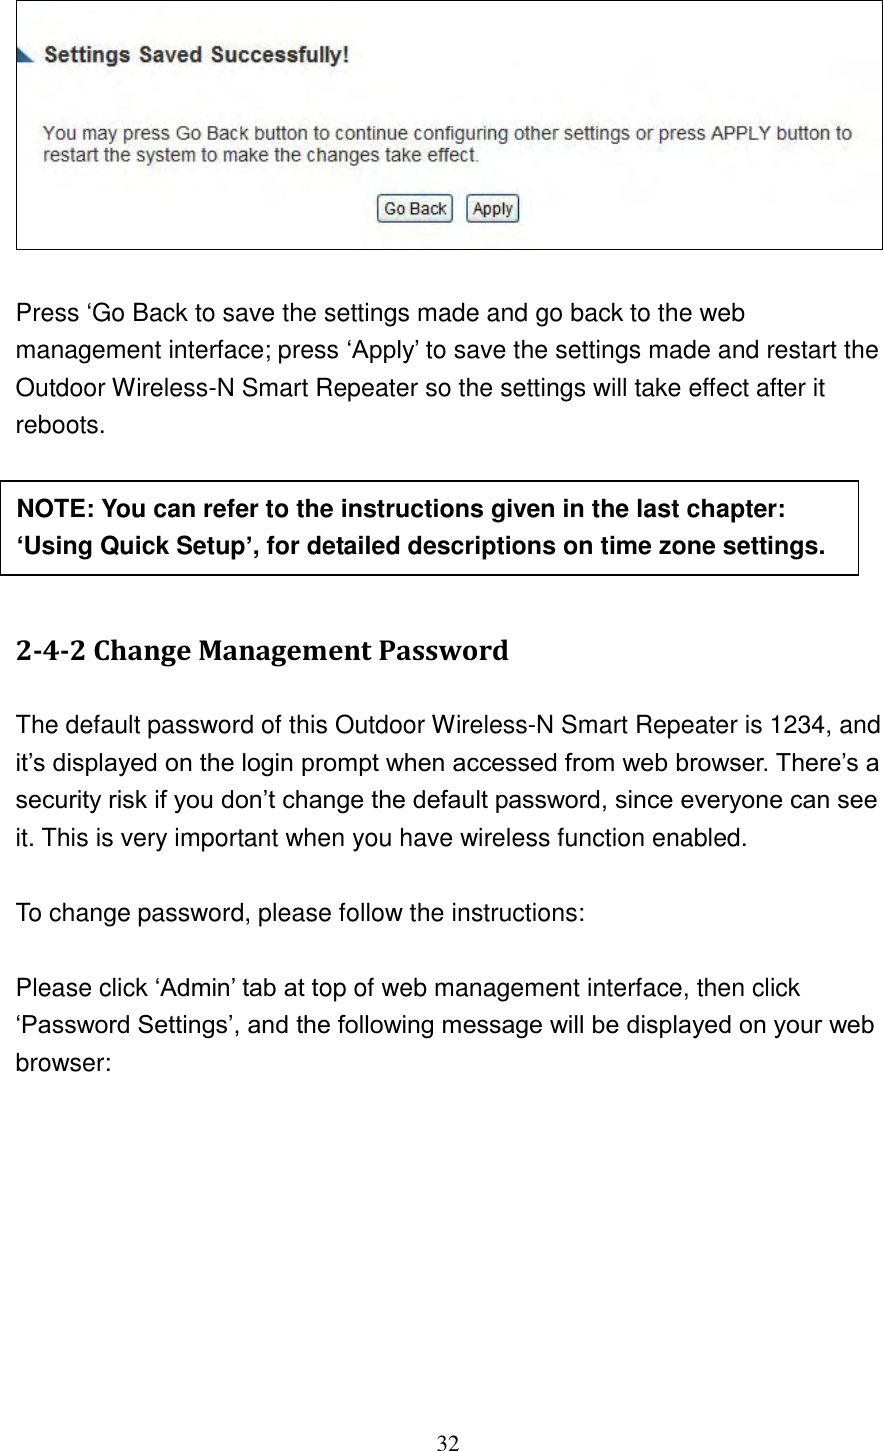 32    Press „Go Back to save the settings made and go back to the web management interface; press „Apply‟ to save the settings made and restart the Outdoor Wireless-N Smart Repeater so the settings will take effect after it reboots.      2-4-2 Change Management Password  The default password of this Outdoor Wireless-N Smart Repeater is 1234, and it‟s displayed on the login prompt when accessed from web browser. There‟s a security risk if you don‟t change the default password, since everyone can see it. This is very important when you have wireless function enabled.  To change password, please follow the instructions:  Please click „Admin‟ tab at top of web management interface, then click „Password Settings‟, and the following message will be displayed on your web browser: NOTE: You can refer to the instructions given in the last chapter: ‘Using Quick Setup’, for detailed descriptions on time zone settings. 